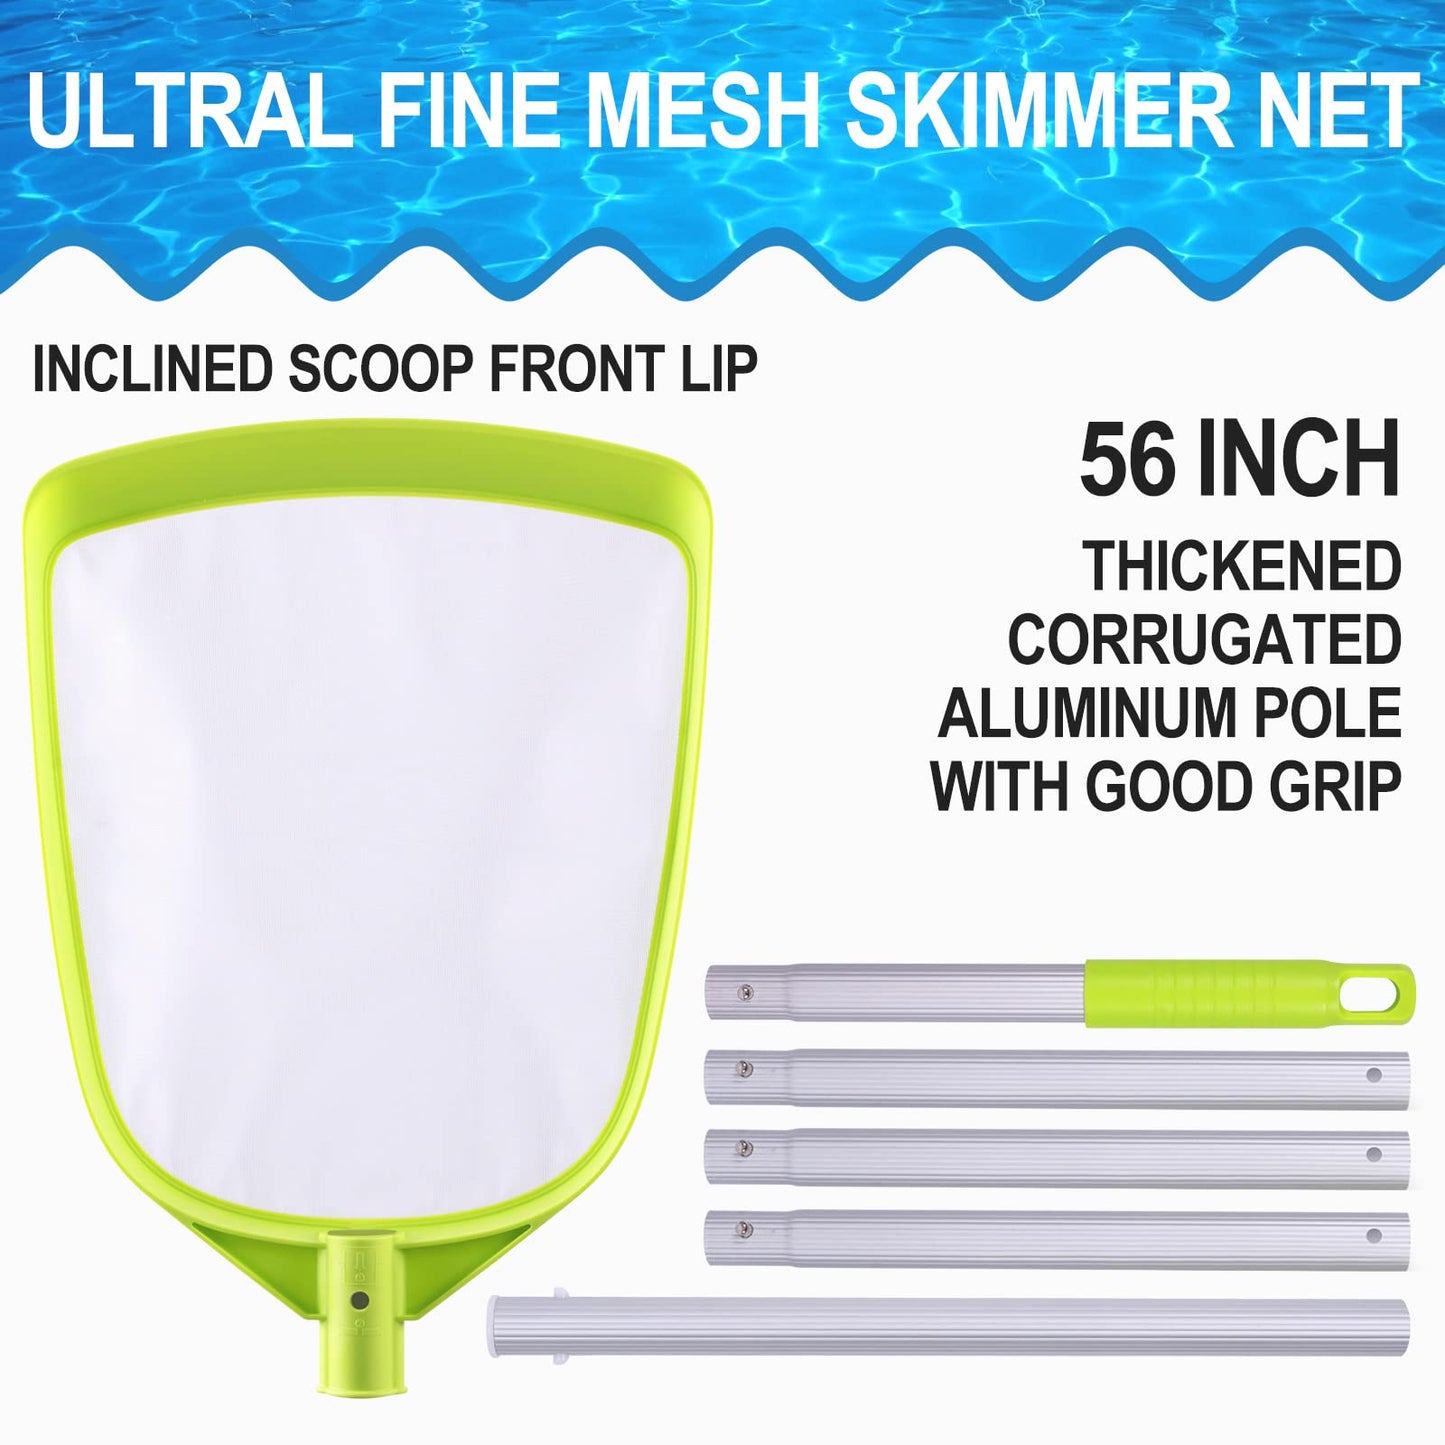 Pool Leaf Skimmer Net with 24-56 Inch Premium Pole,Medium Sized Ultral Fine Mesh Net for Cleaning Pool, Pond,Spa,Hot Tub Ultra Fine Mesh